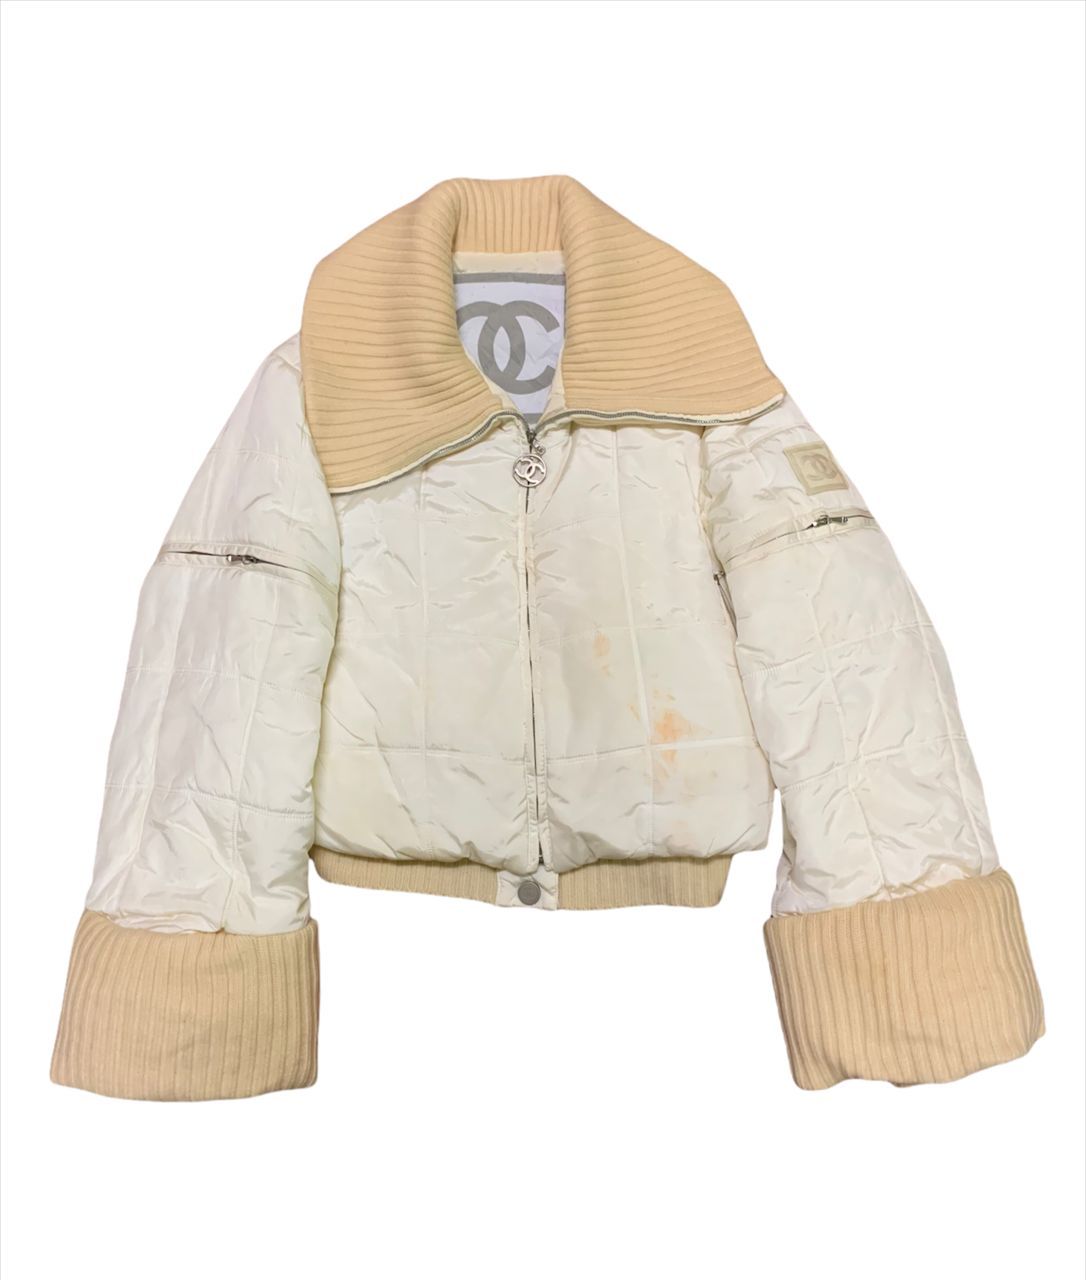 Chanel A/W 2000 puffer jacket from @treasuresofny! Obsessed!